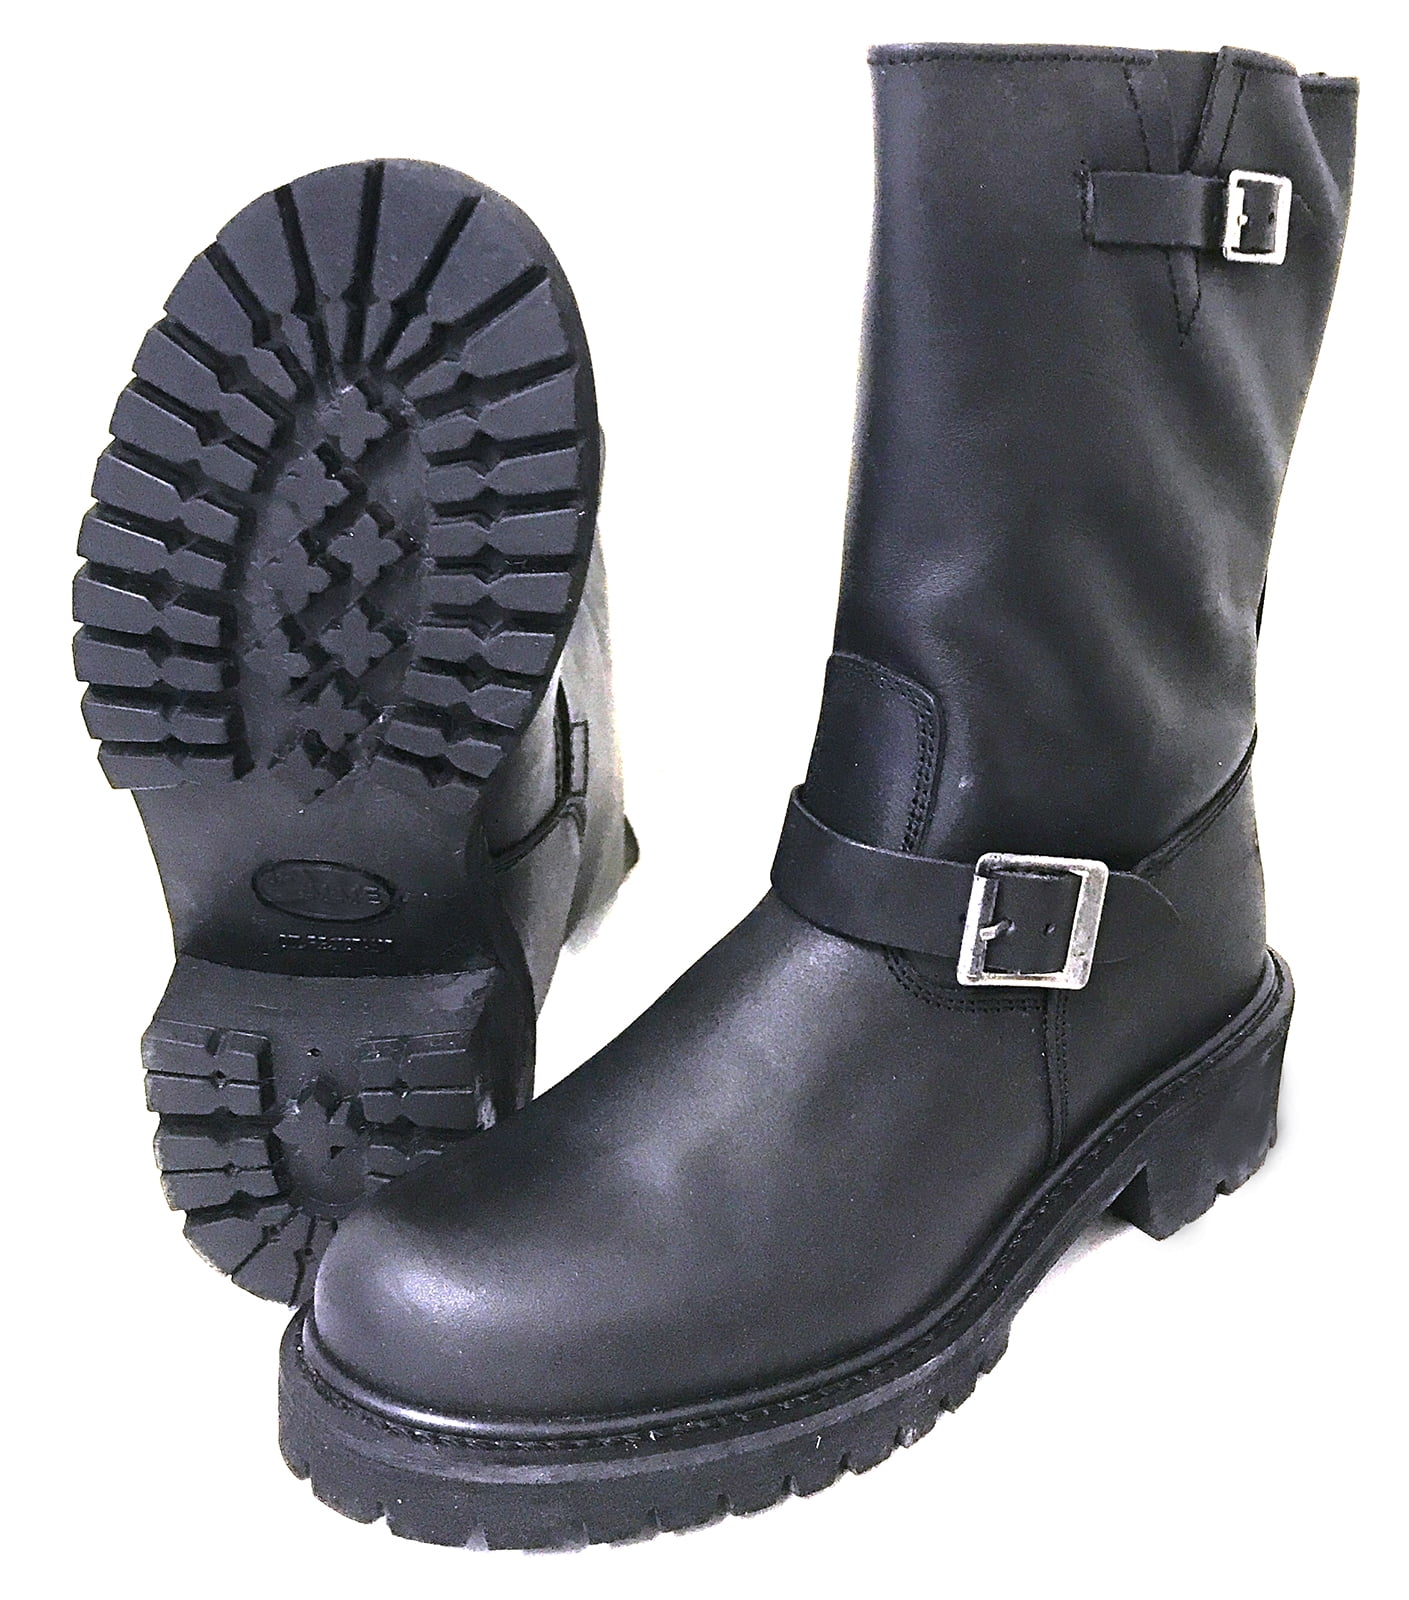 engineer boots mens